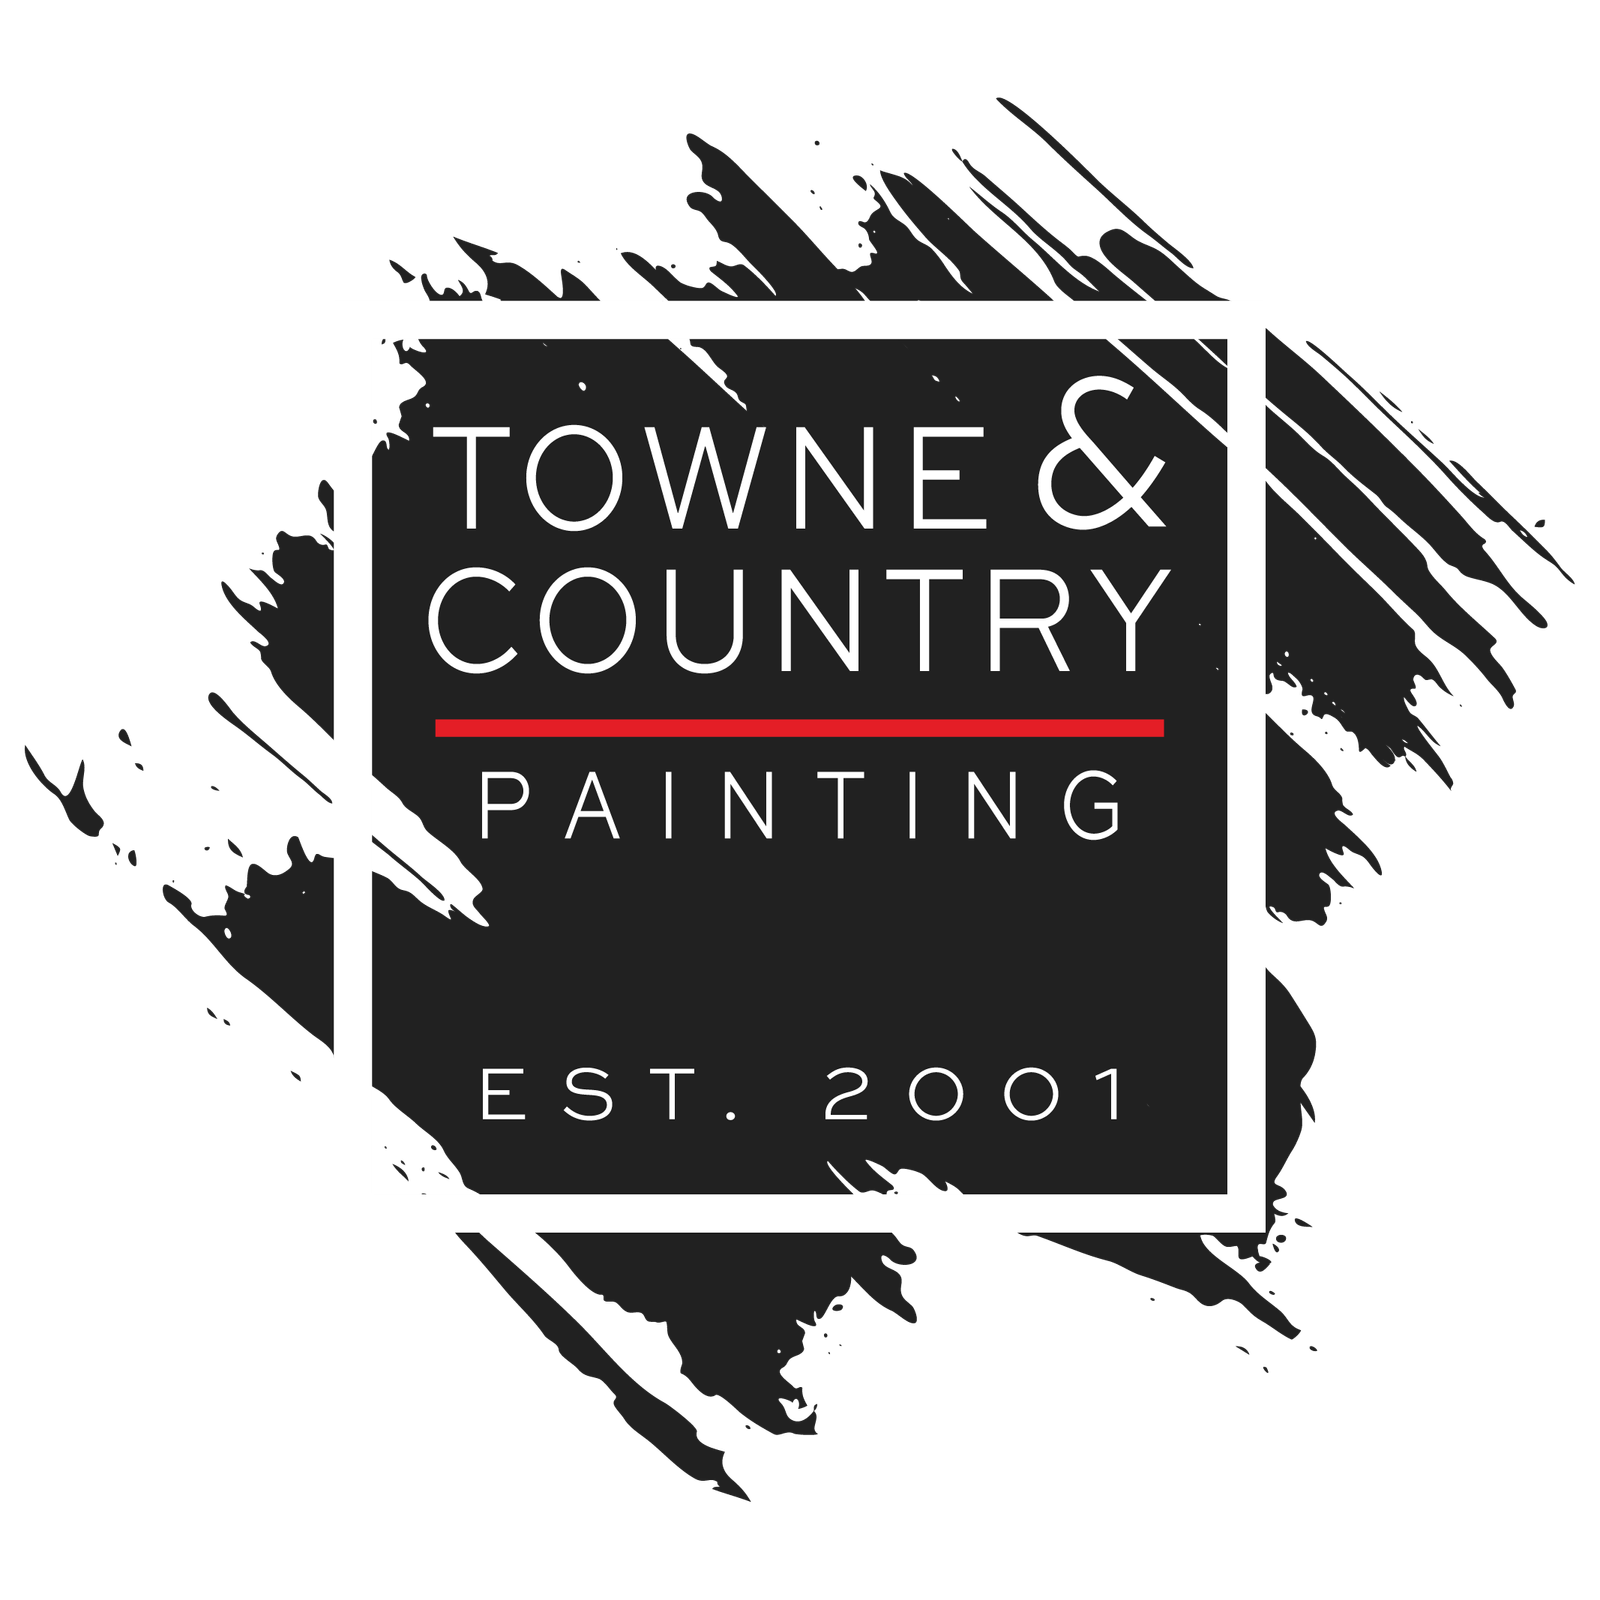 towneandcountrypainting.co